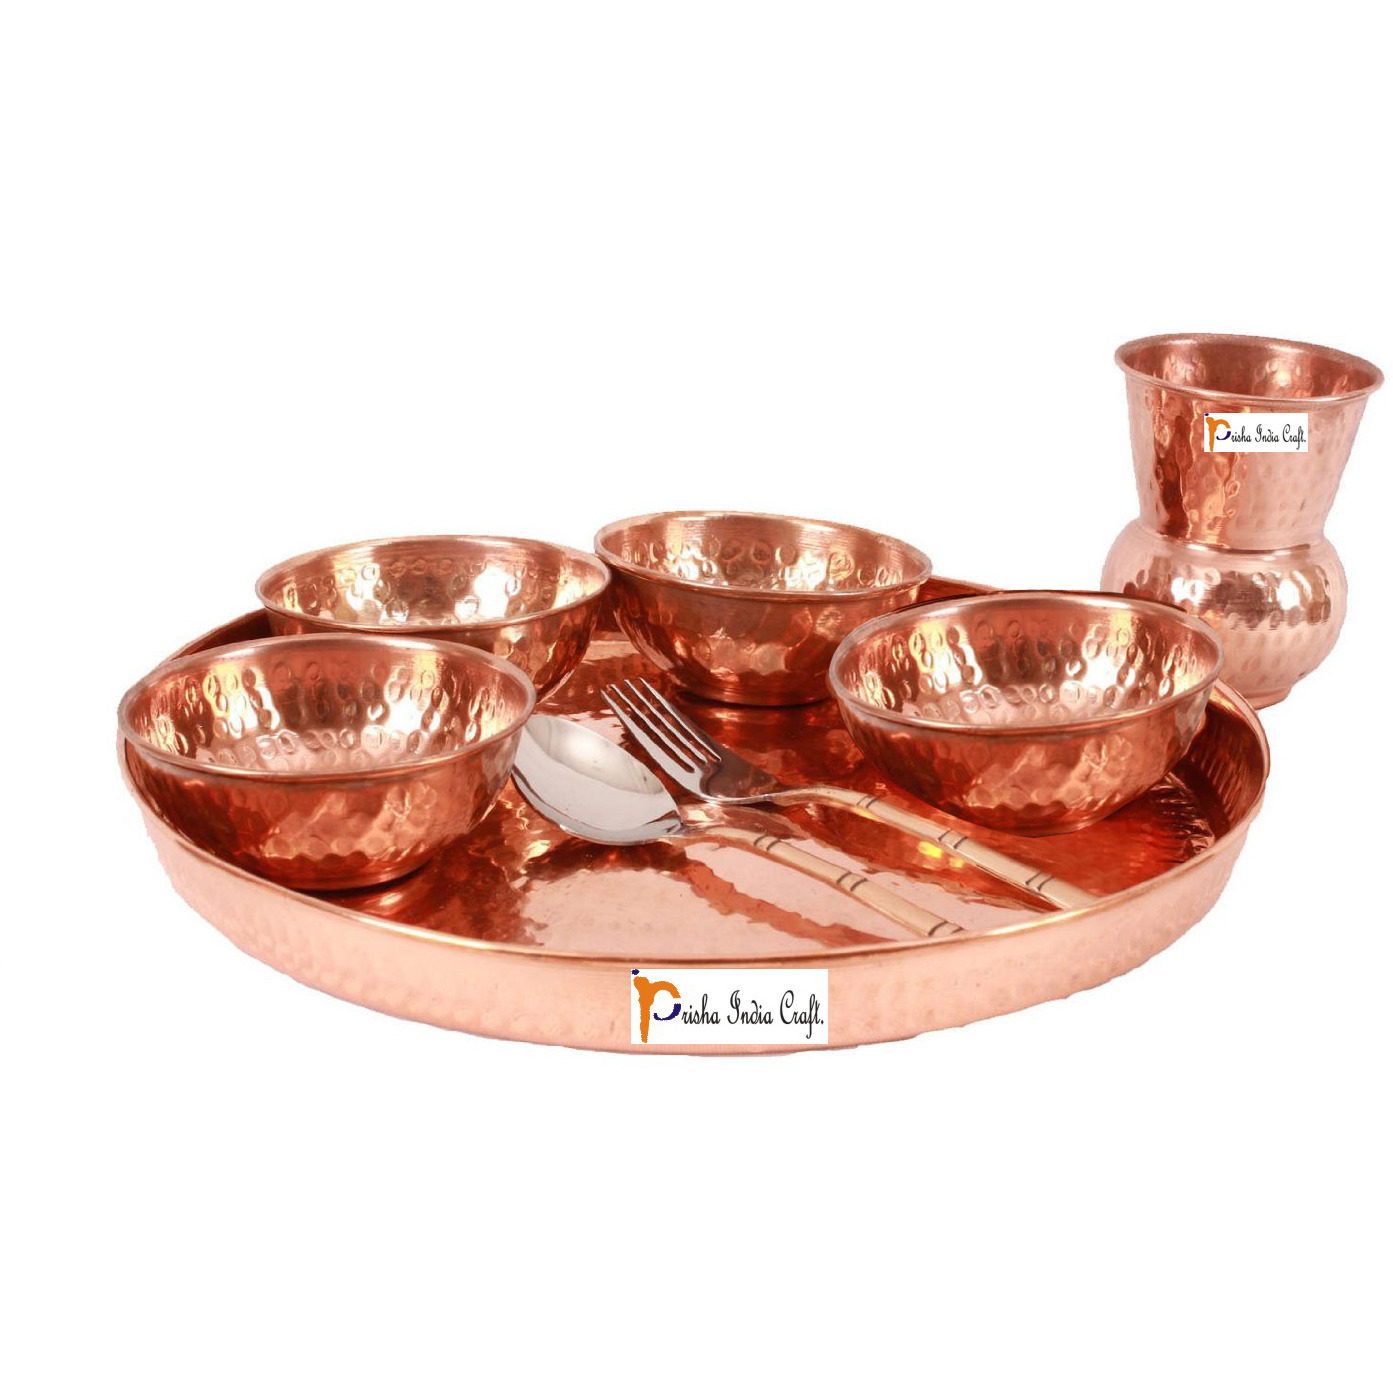 Prisha India Craft B. Dinnerware Traditional 100% Pure Copper Dinner Set of Thali Plate, Bowls, Glass and Spoon, Dia 12  With 1 Pure Copper Classic Pitcher Jug - Christmas Gift